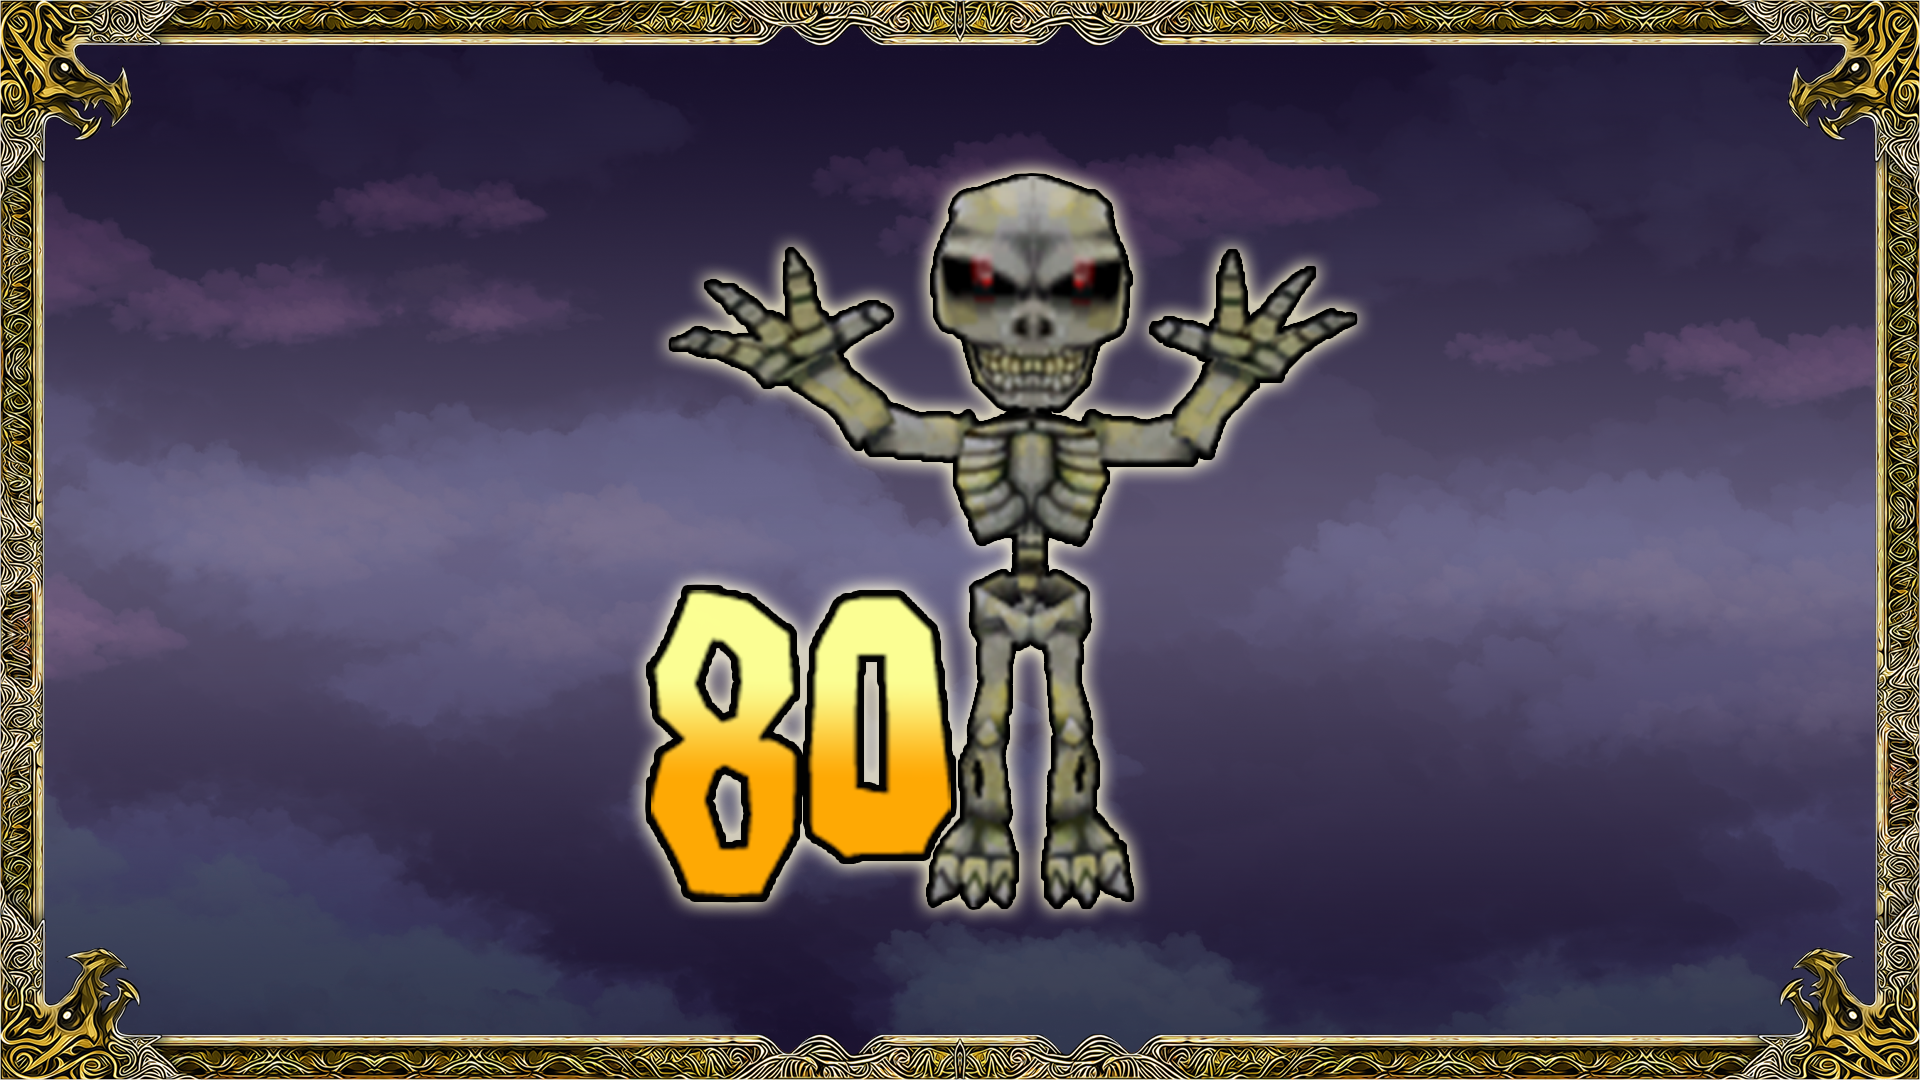 Icon for Defeat 80 skeletons